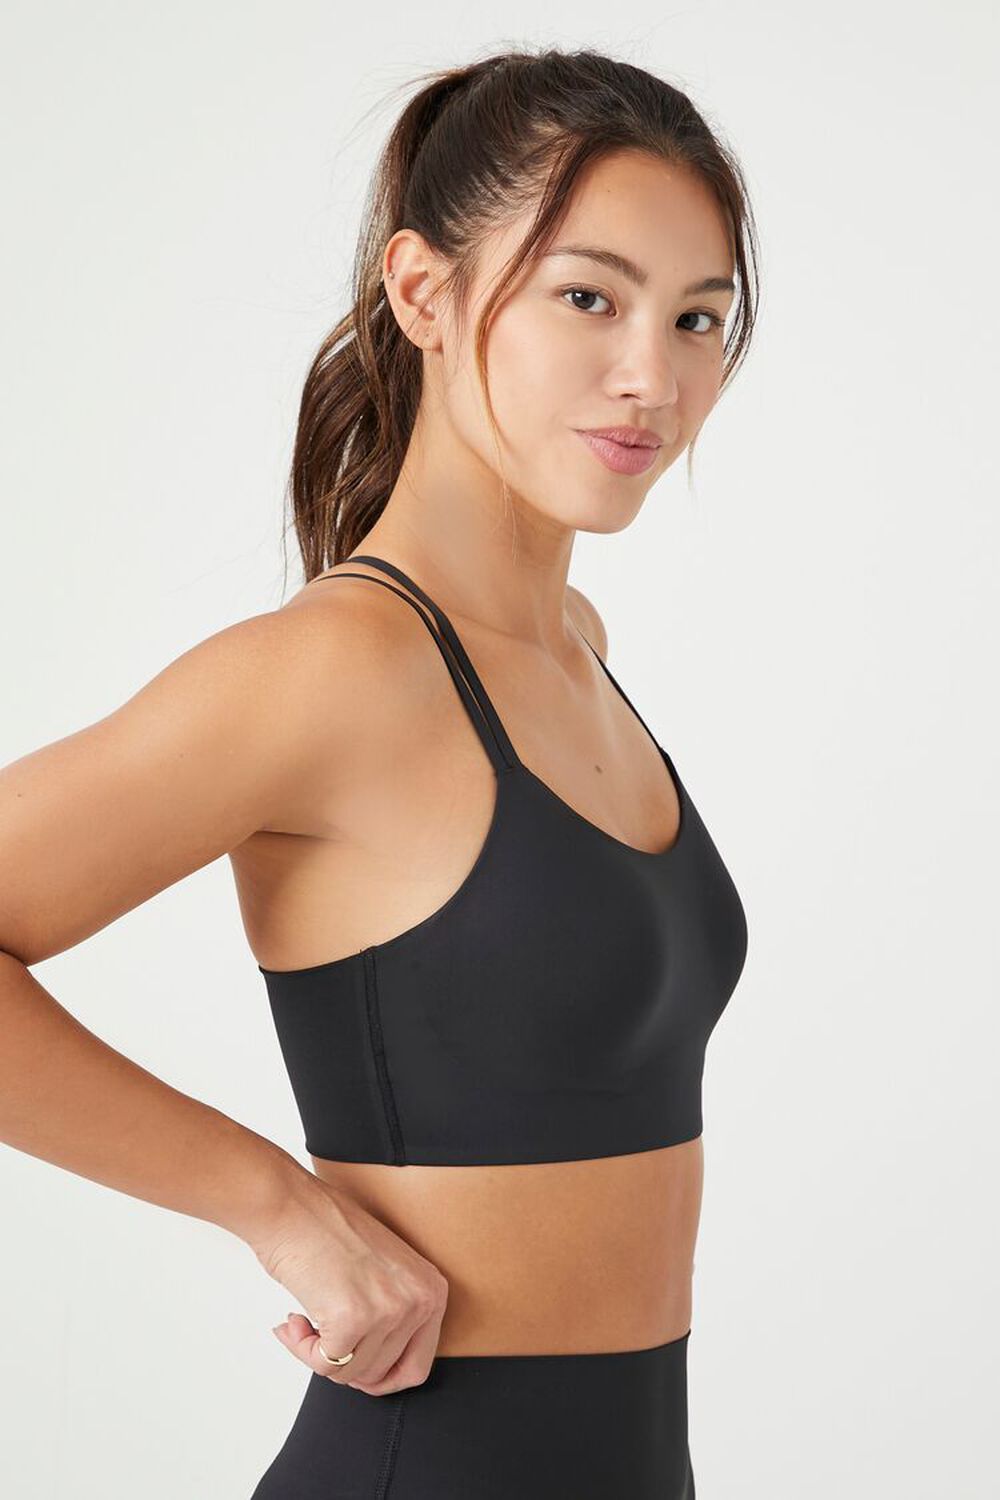 Strappy Back Sports Bra – The WestWay Active